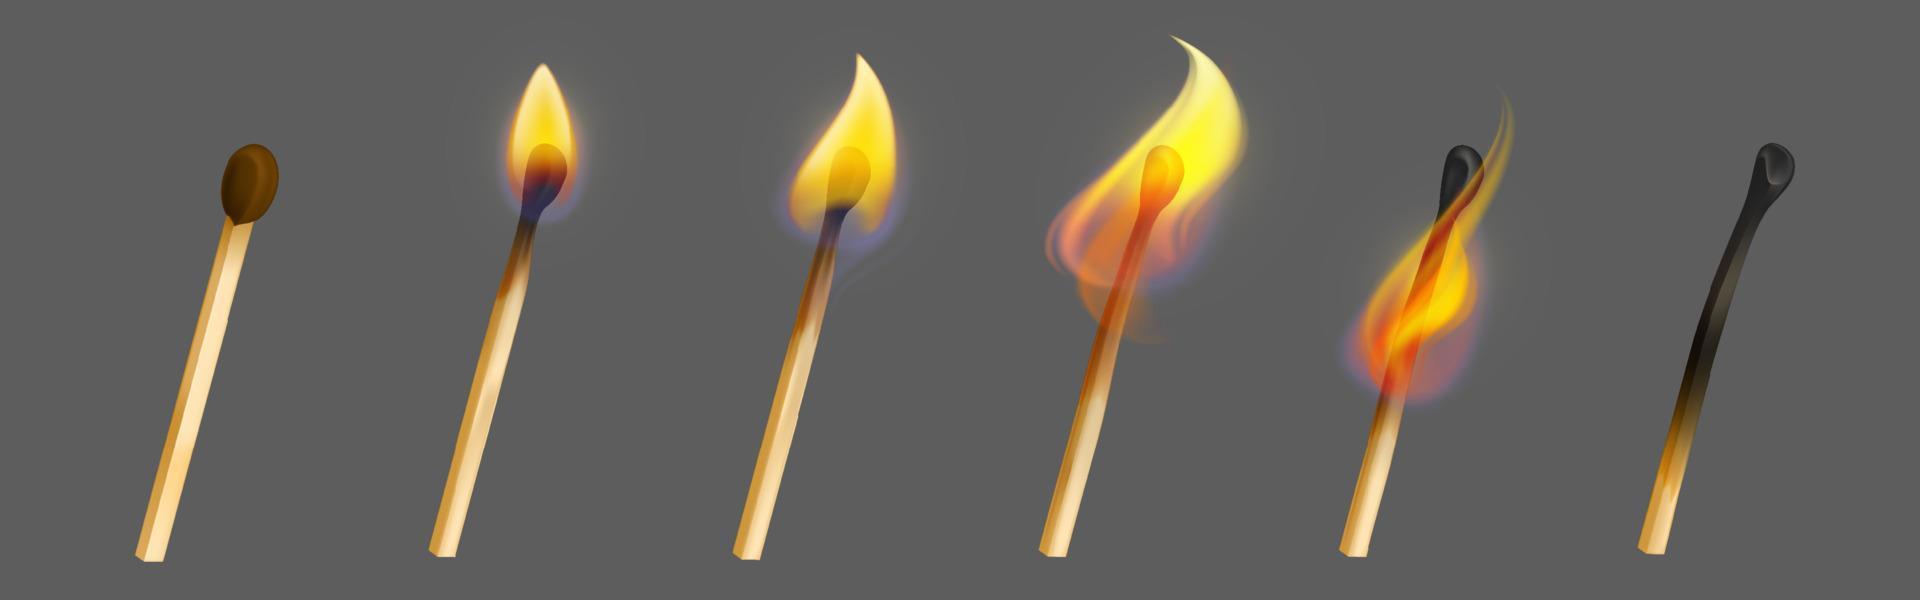 Match stick with fire in different stage of burn vector